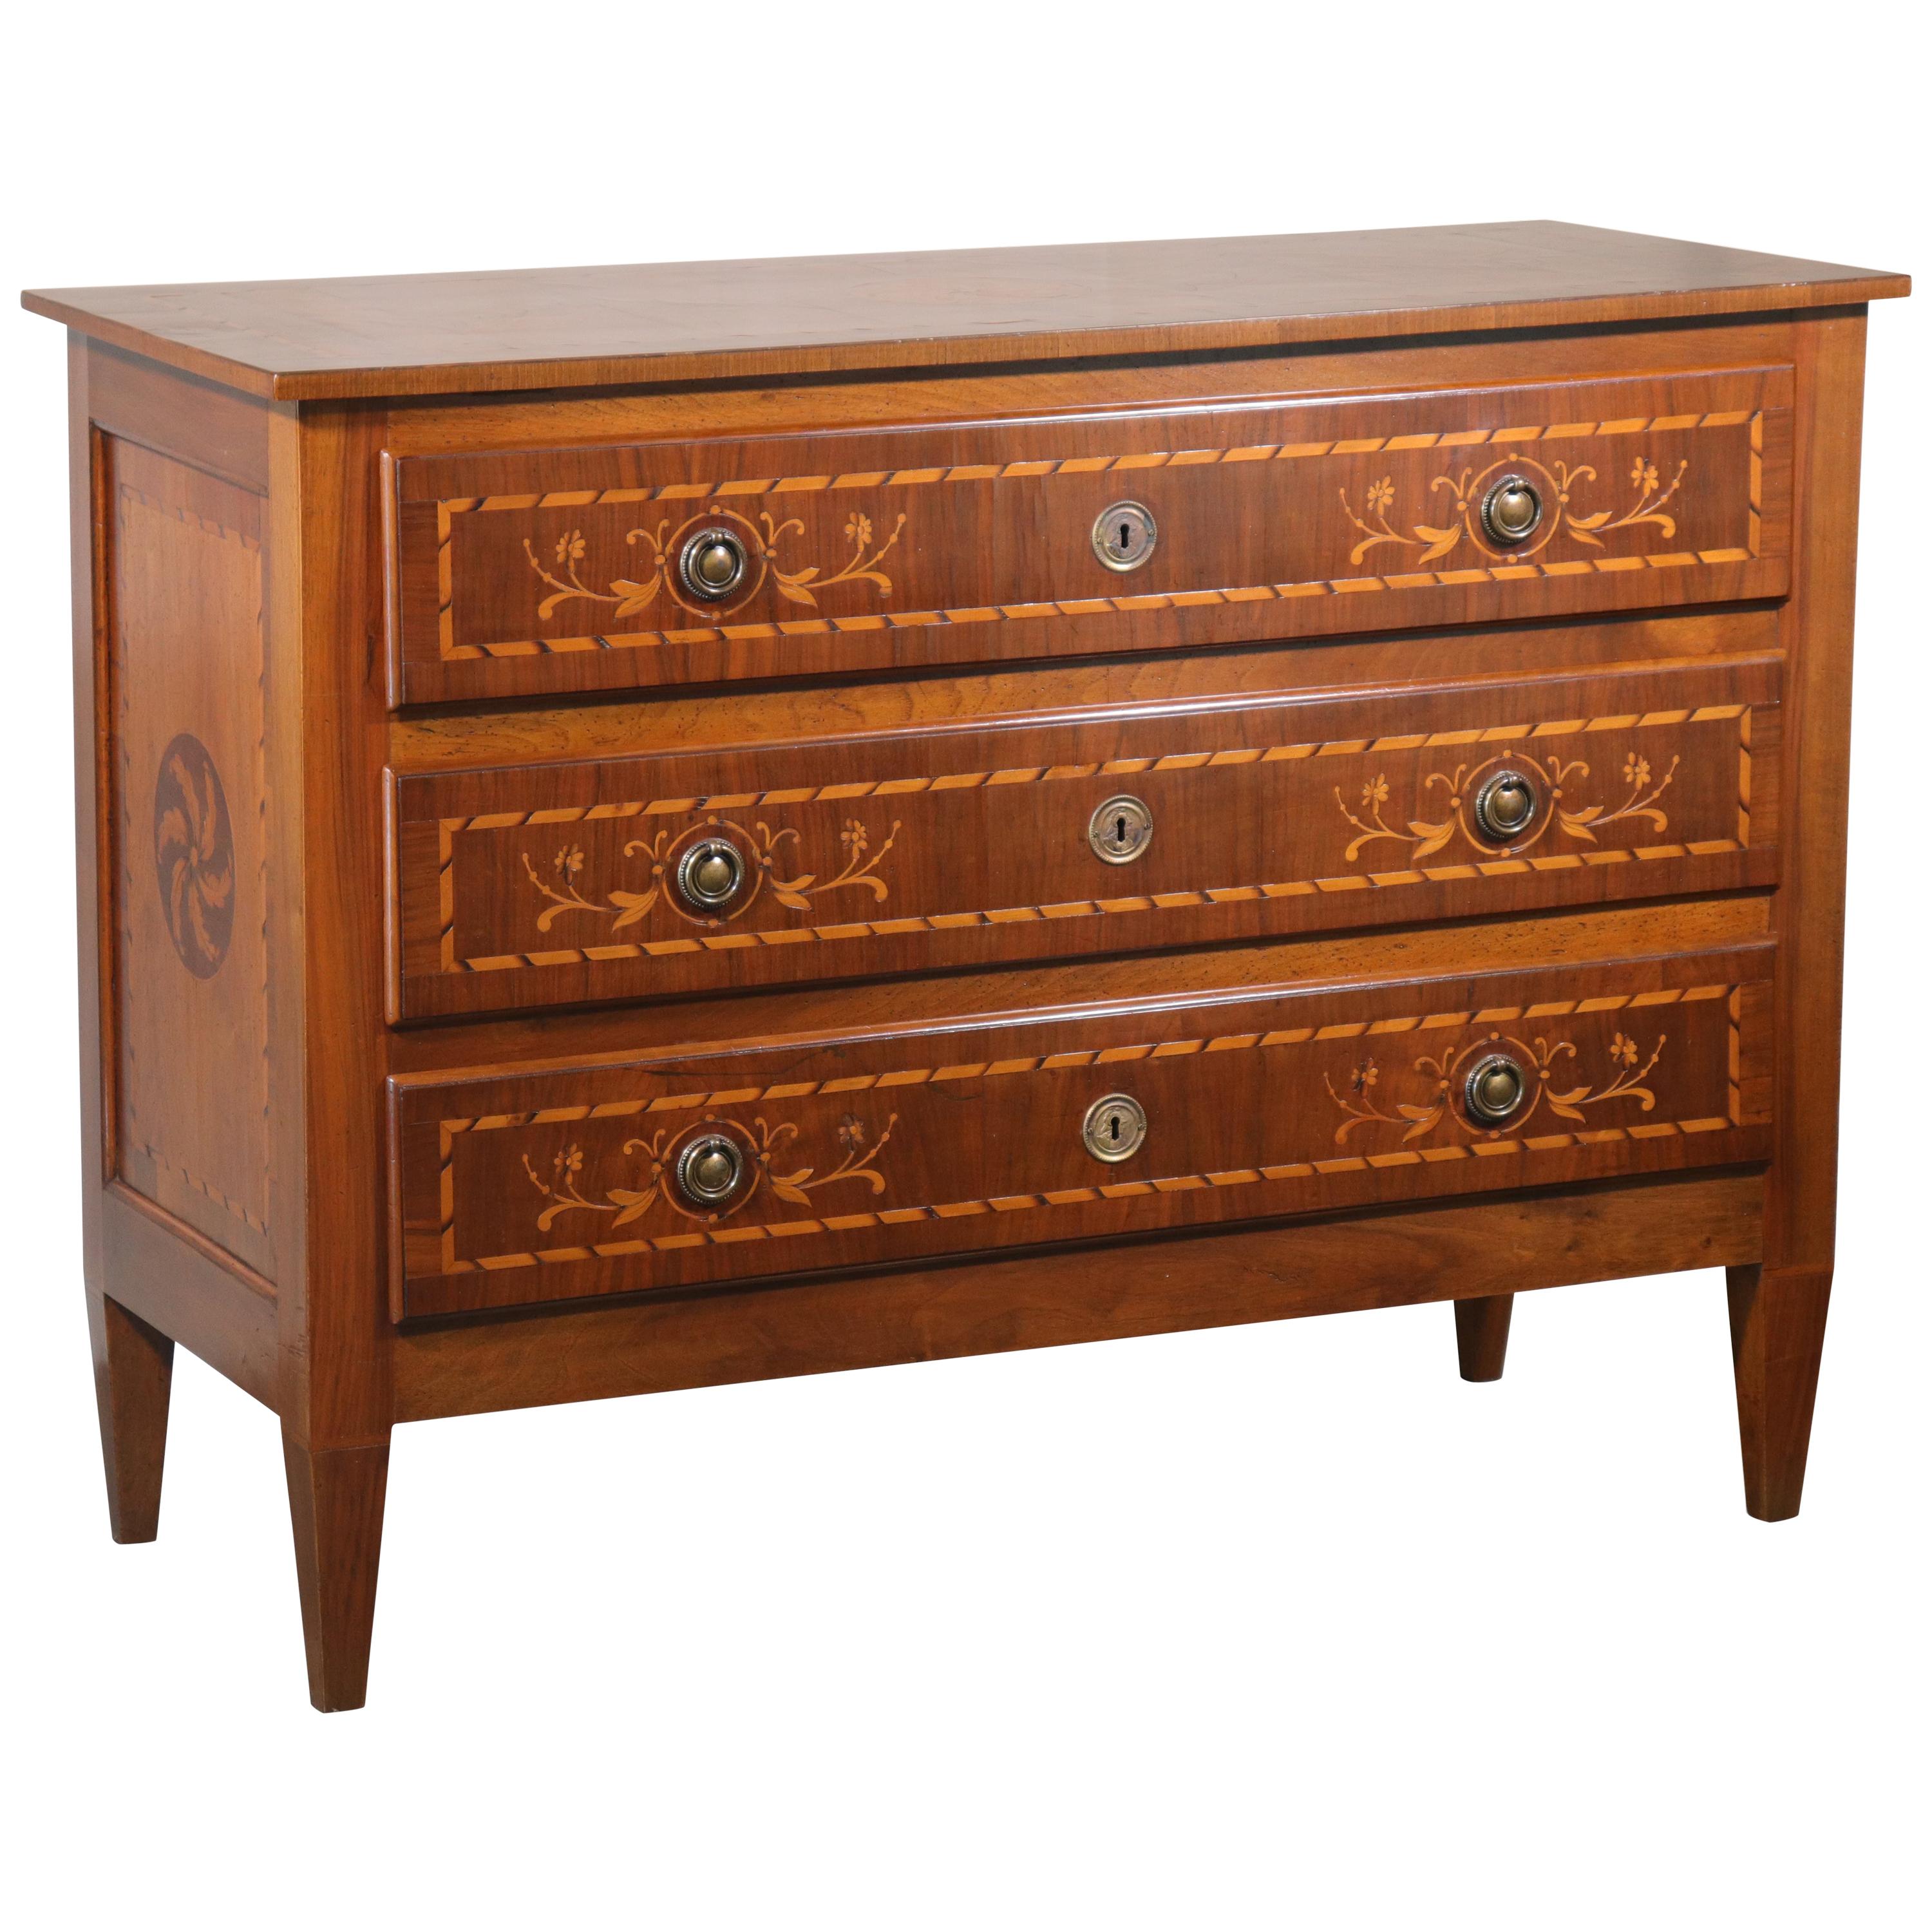 Rare Italian Walnut and Oak Marquetry Commode, Museum Quality, circa 1700 For Sale